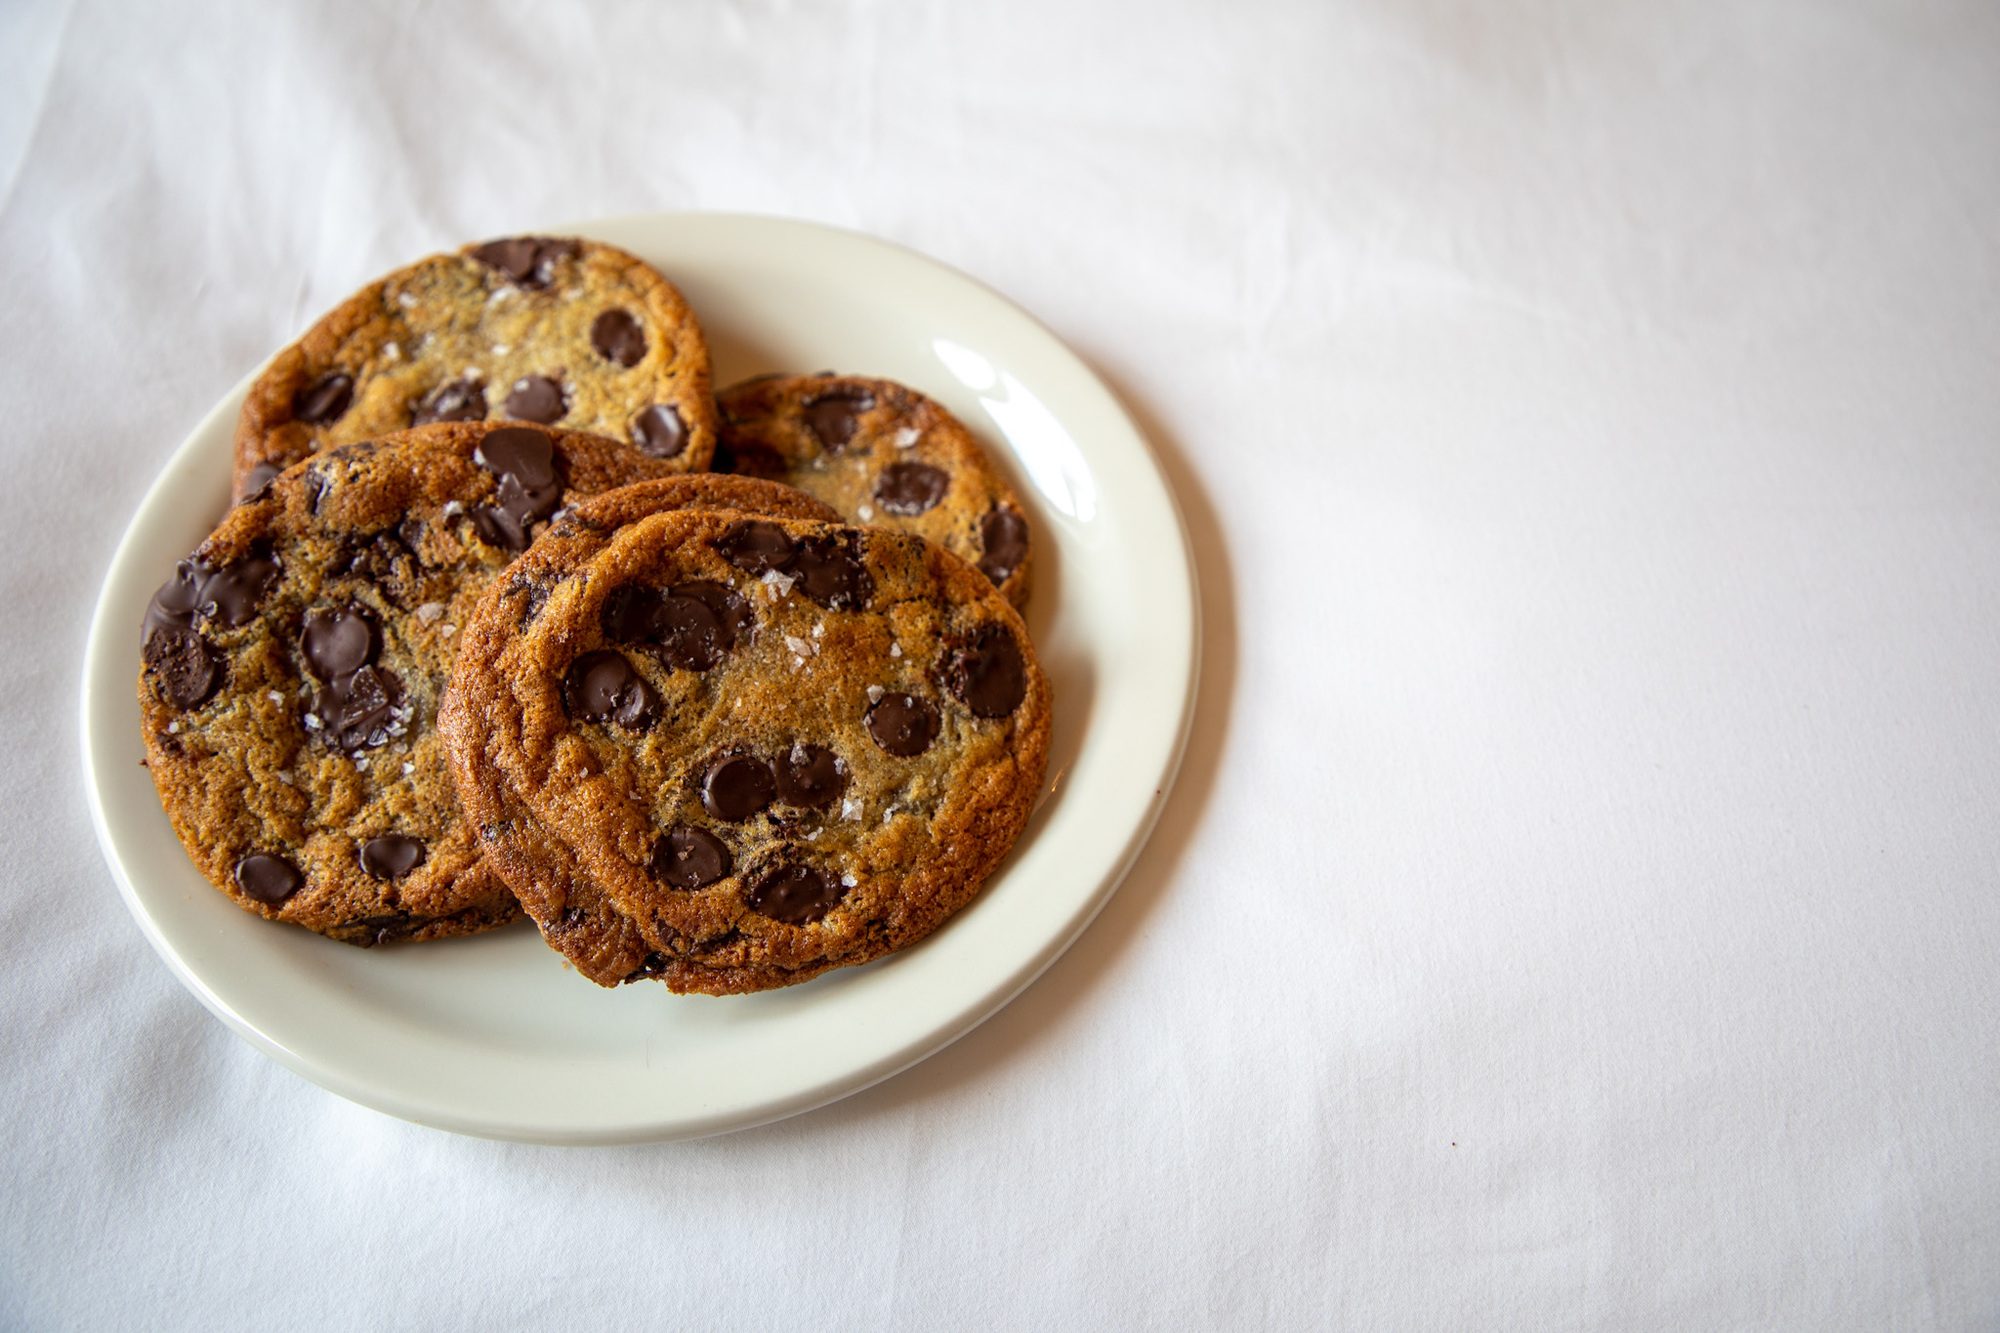 Wayside warm chocolate chip cookies at The Francis packages